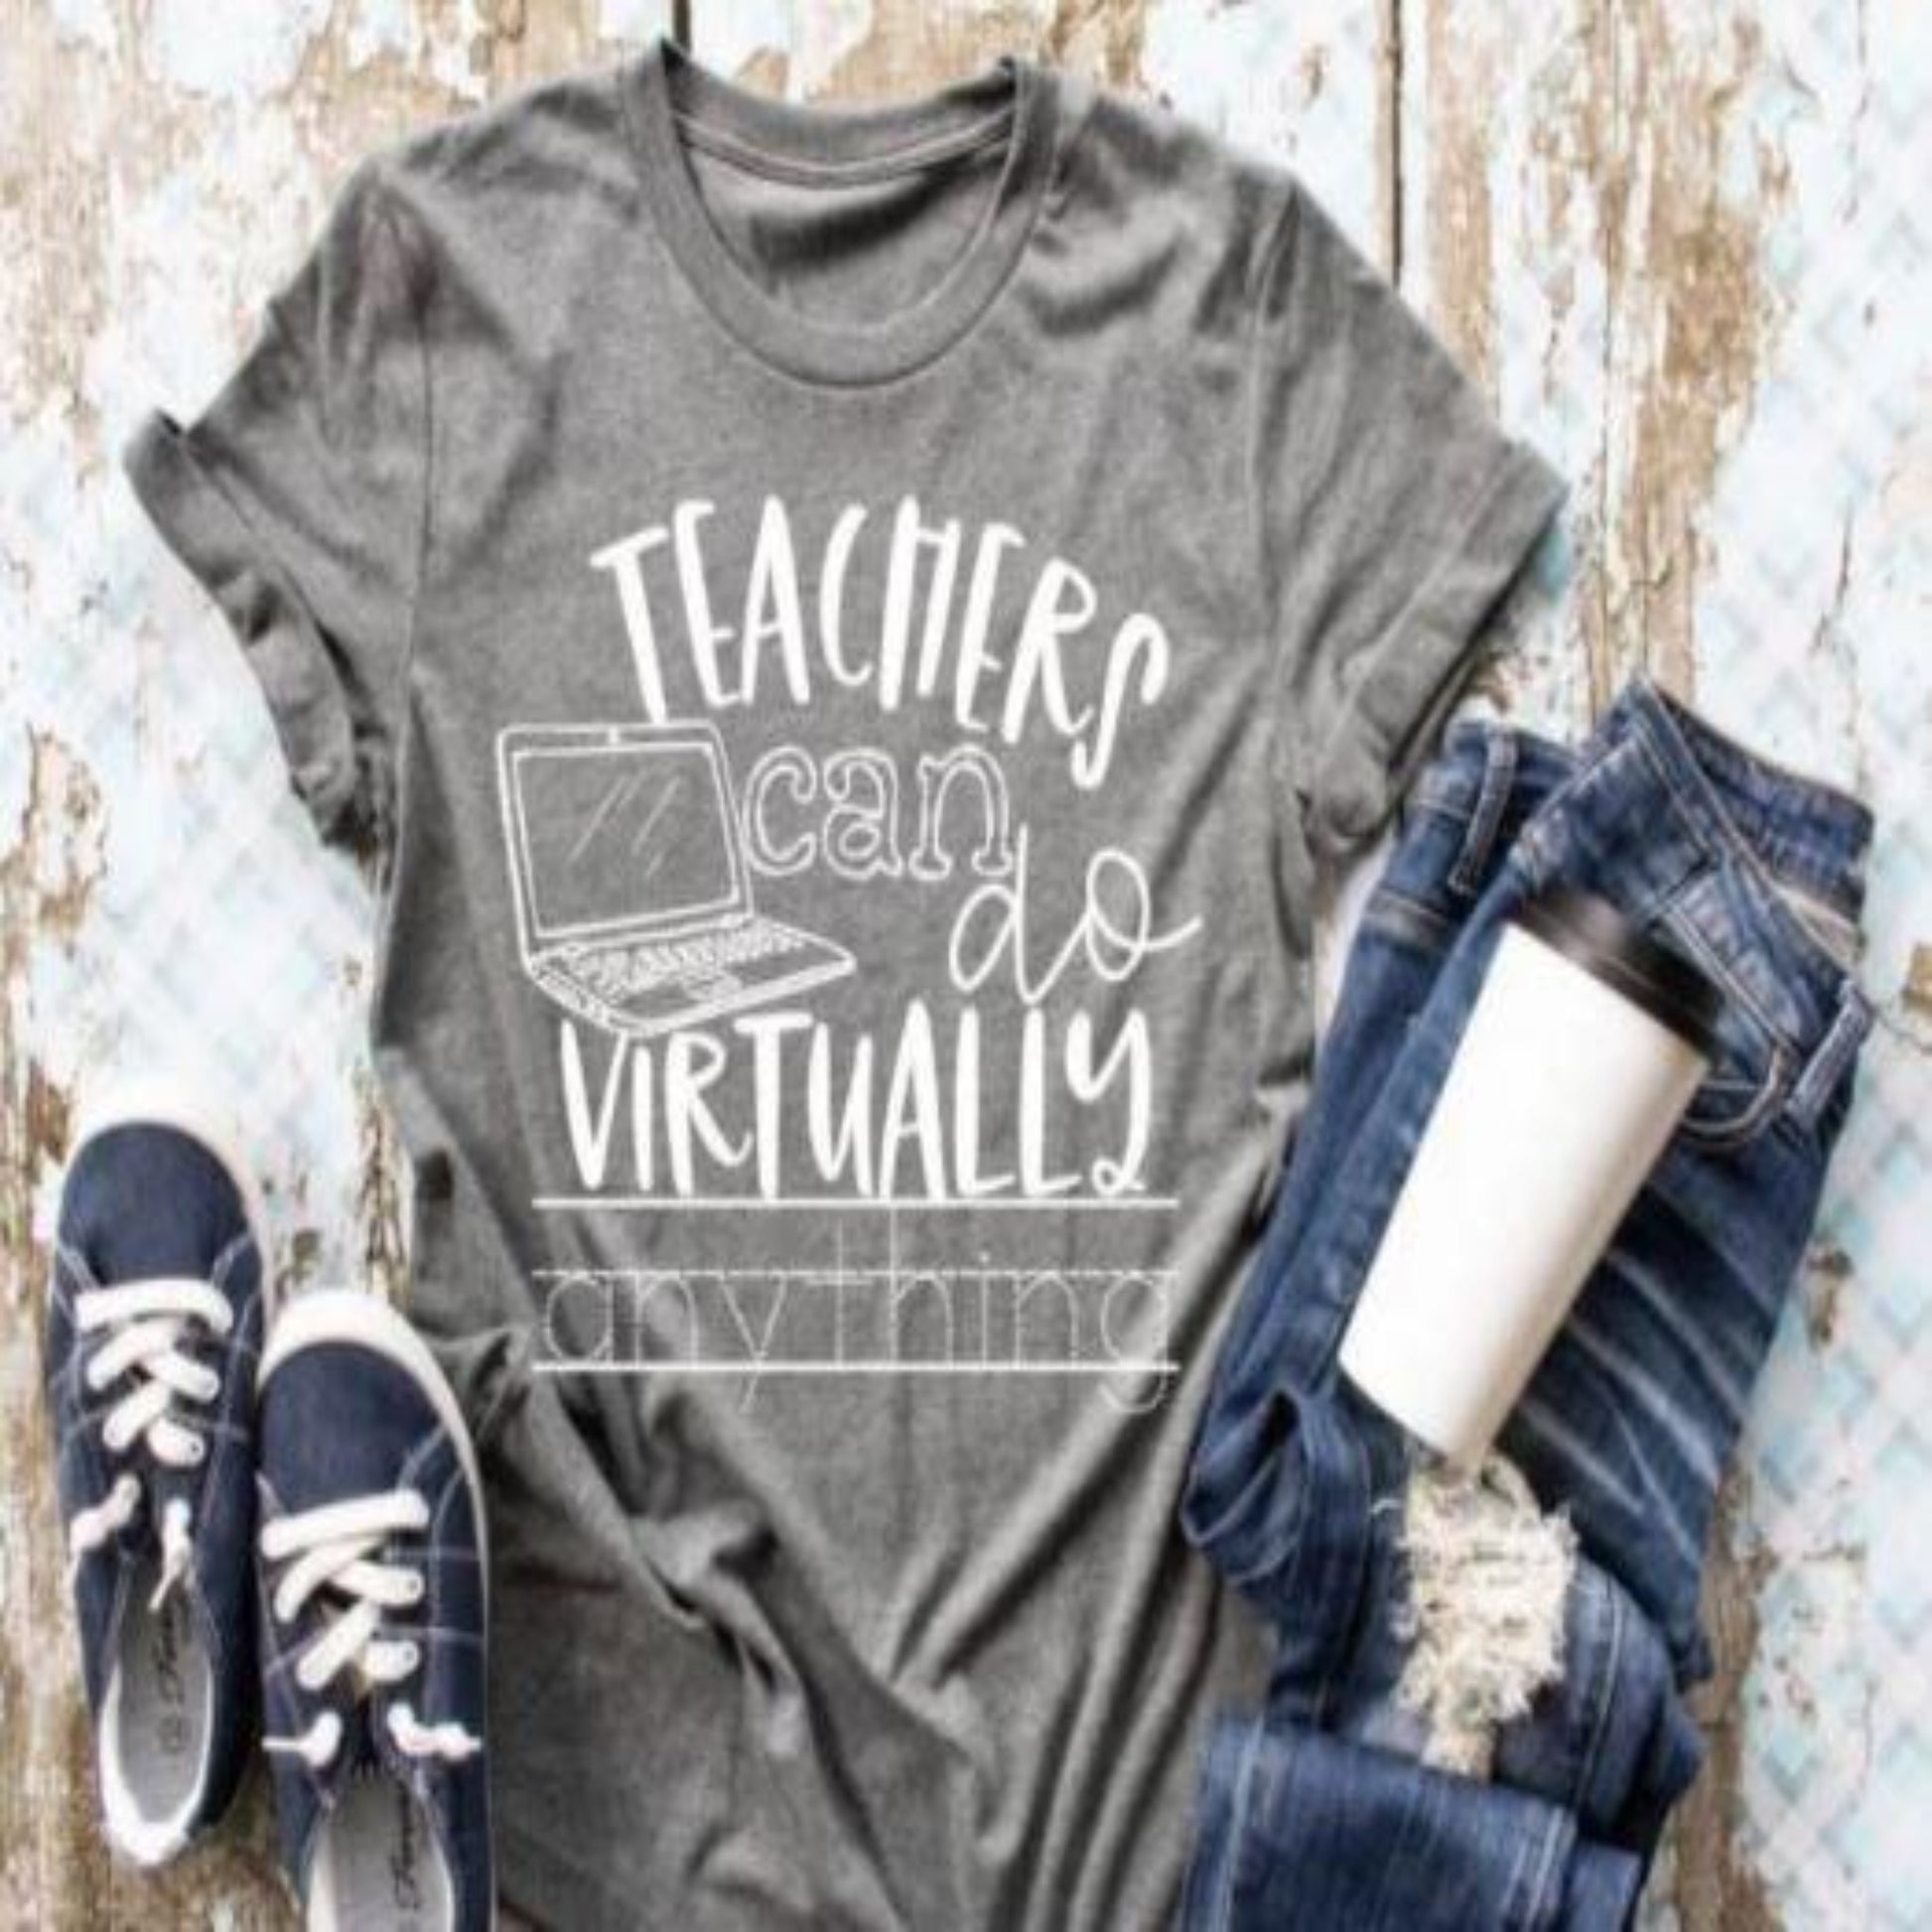 teachers_can_do_virtually_anything specialty tee casual shirt comfortable tshirt everyday wear